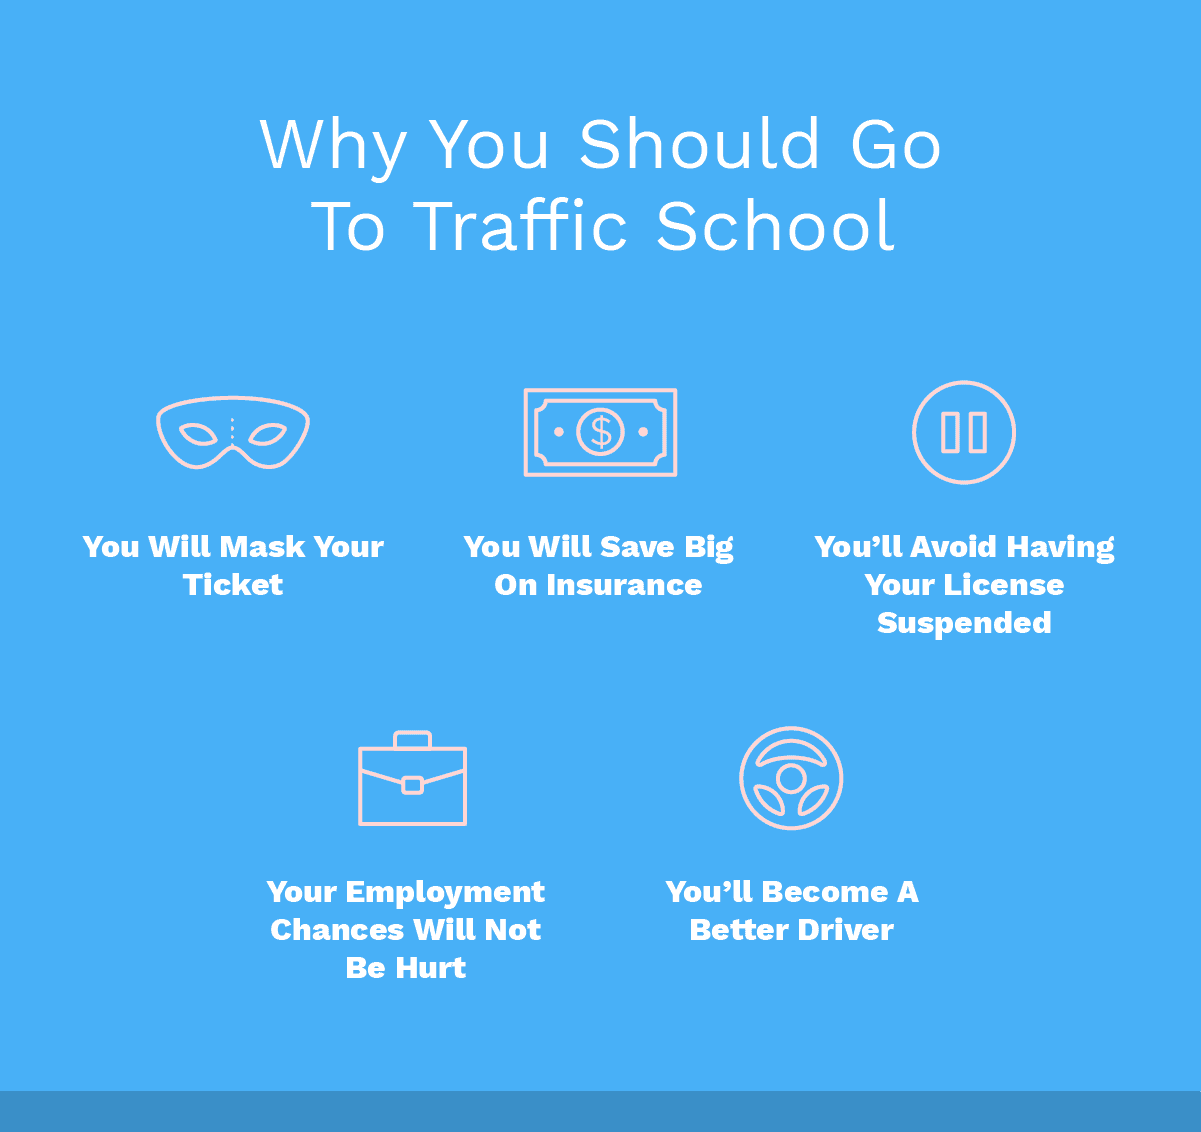 Why You Should Go To Traffic School